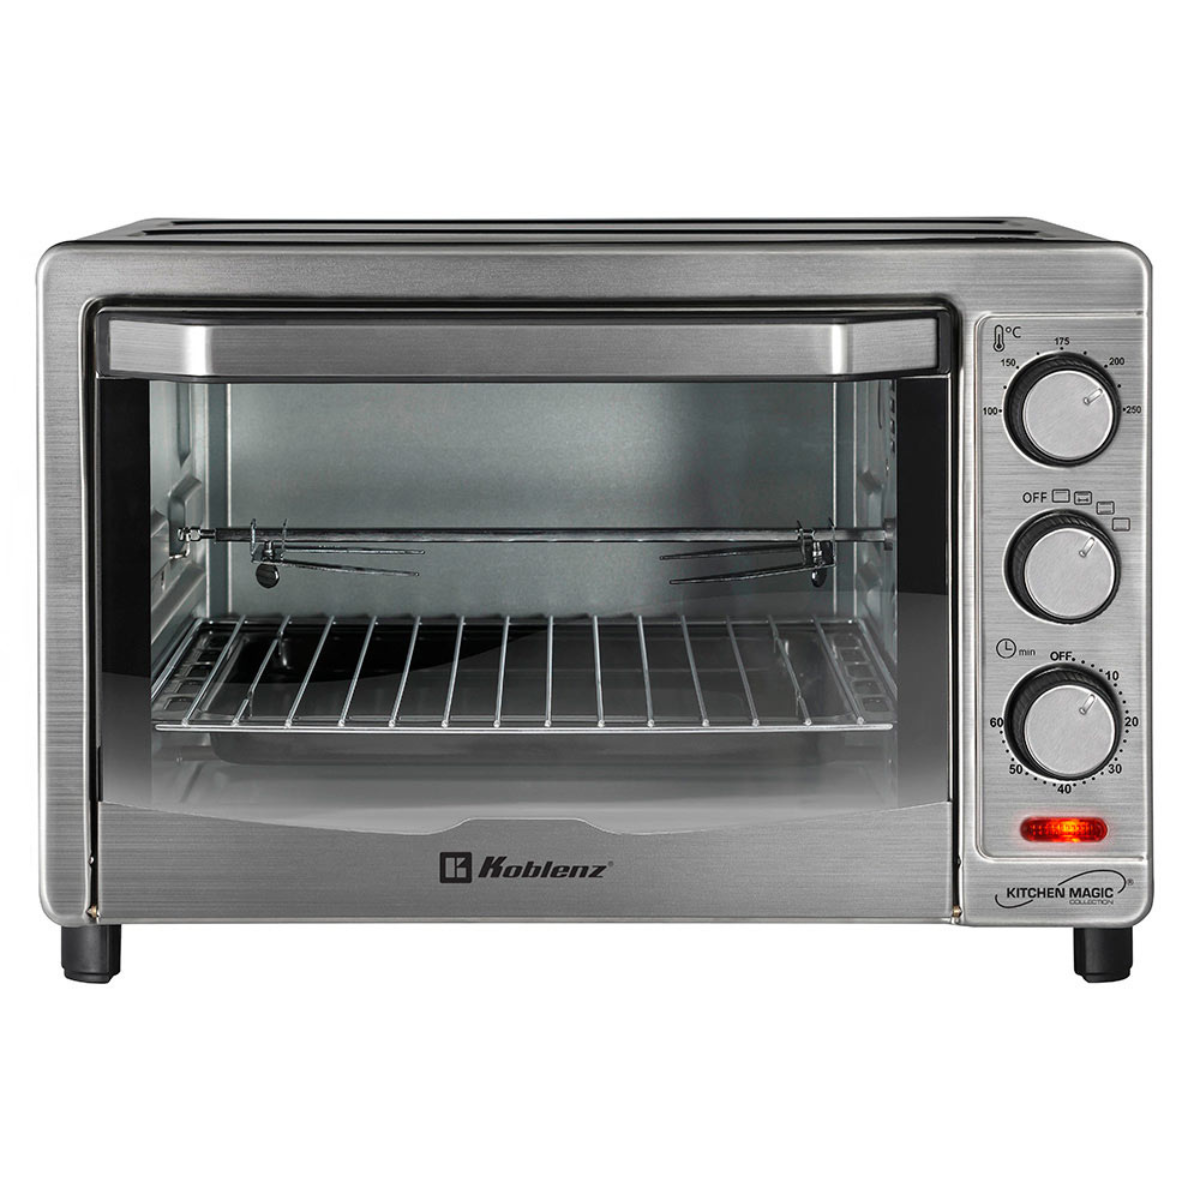 Toaster Oven with Rotisserie HKM-1500 R